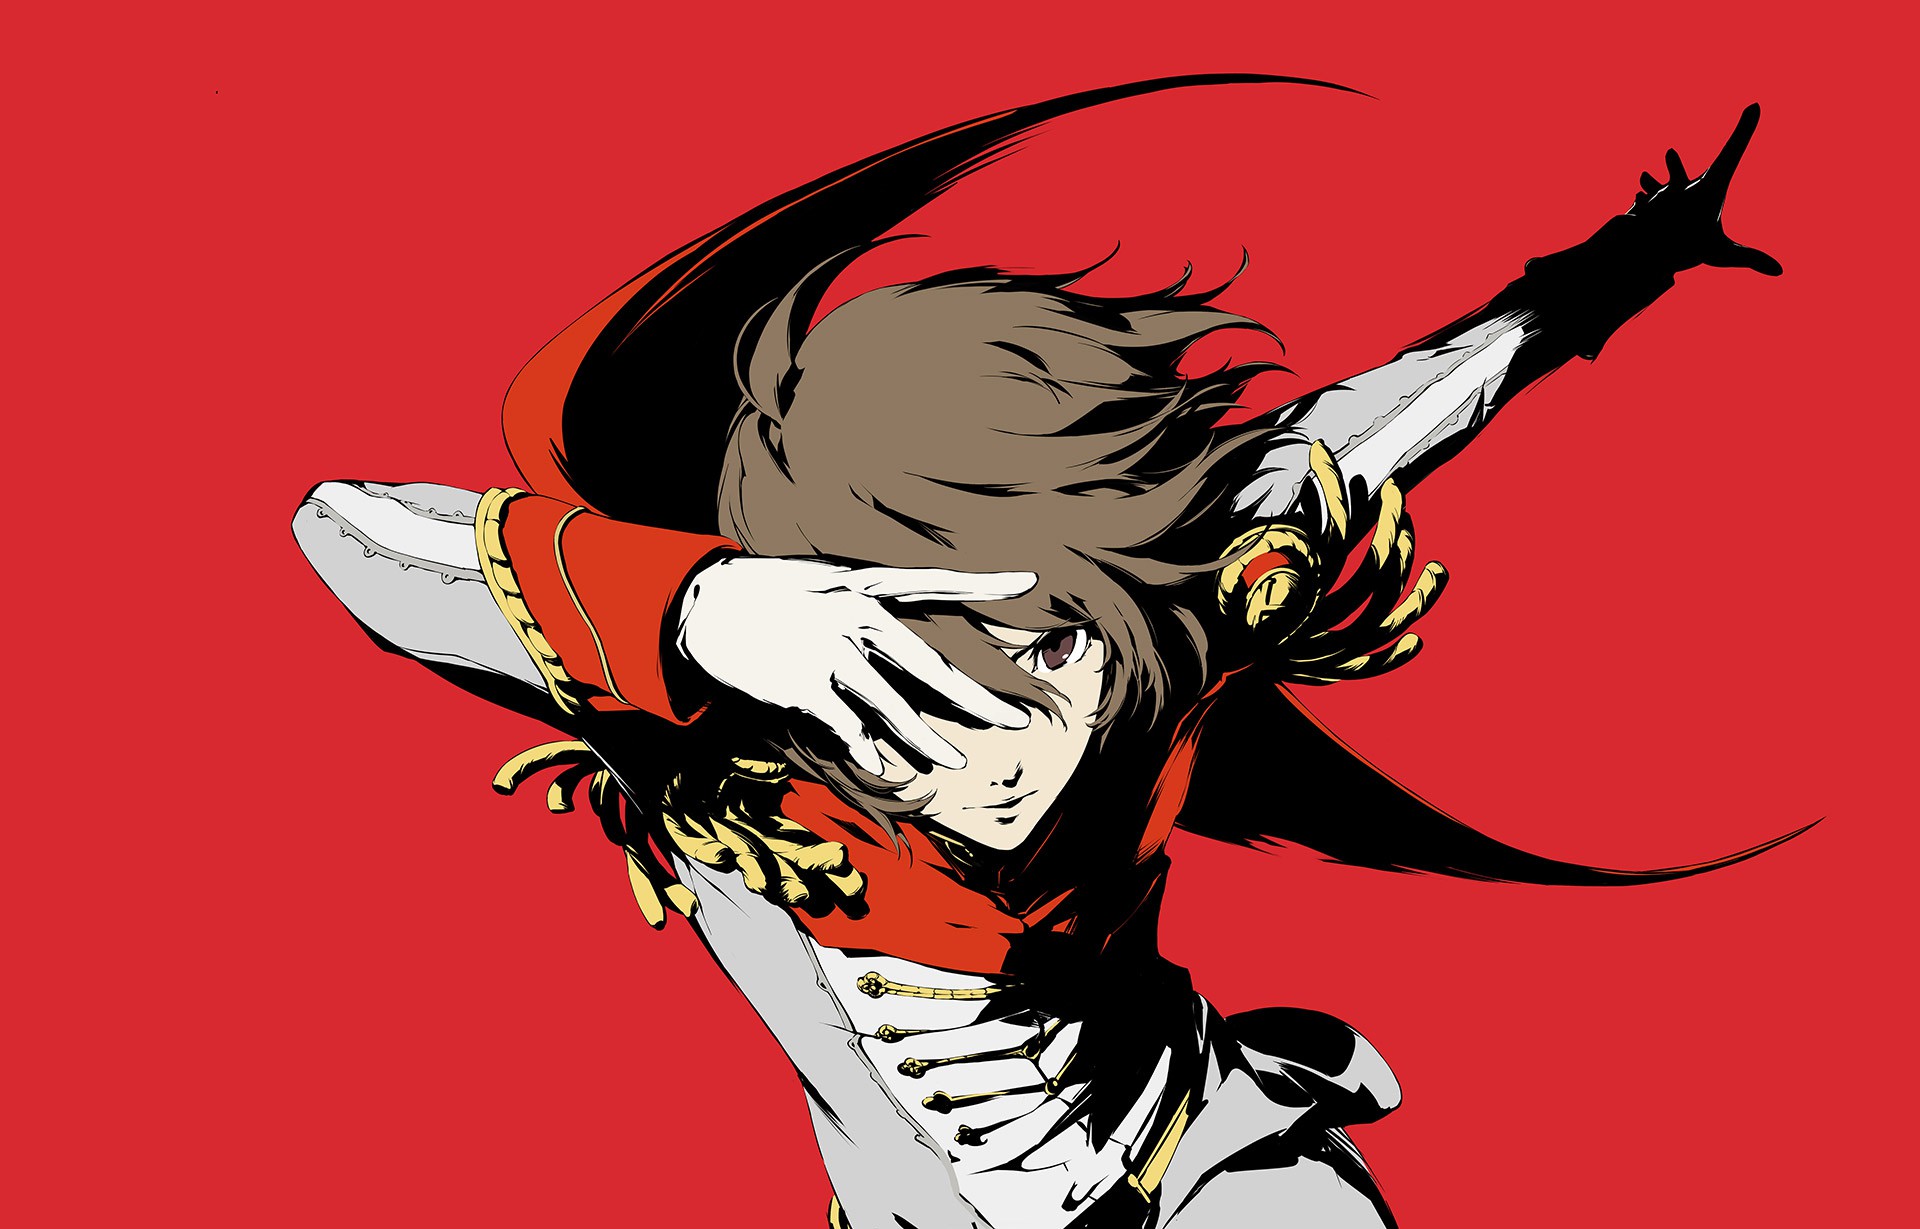 Artwork Akechi Persona 5 Atlus Cook And Becker